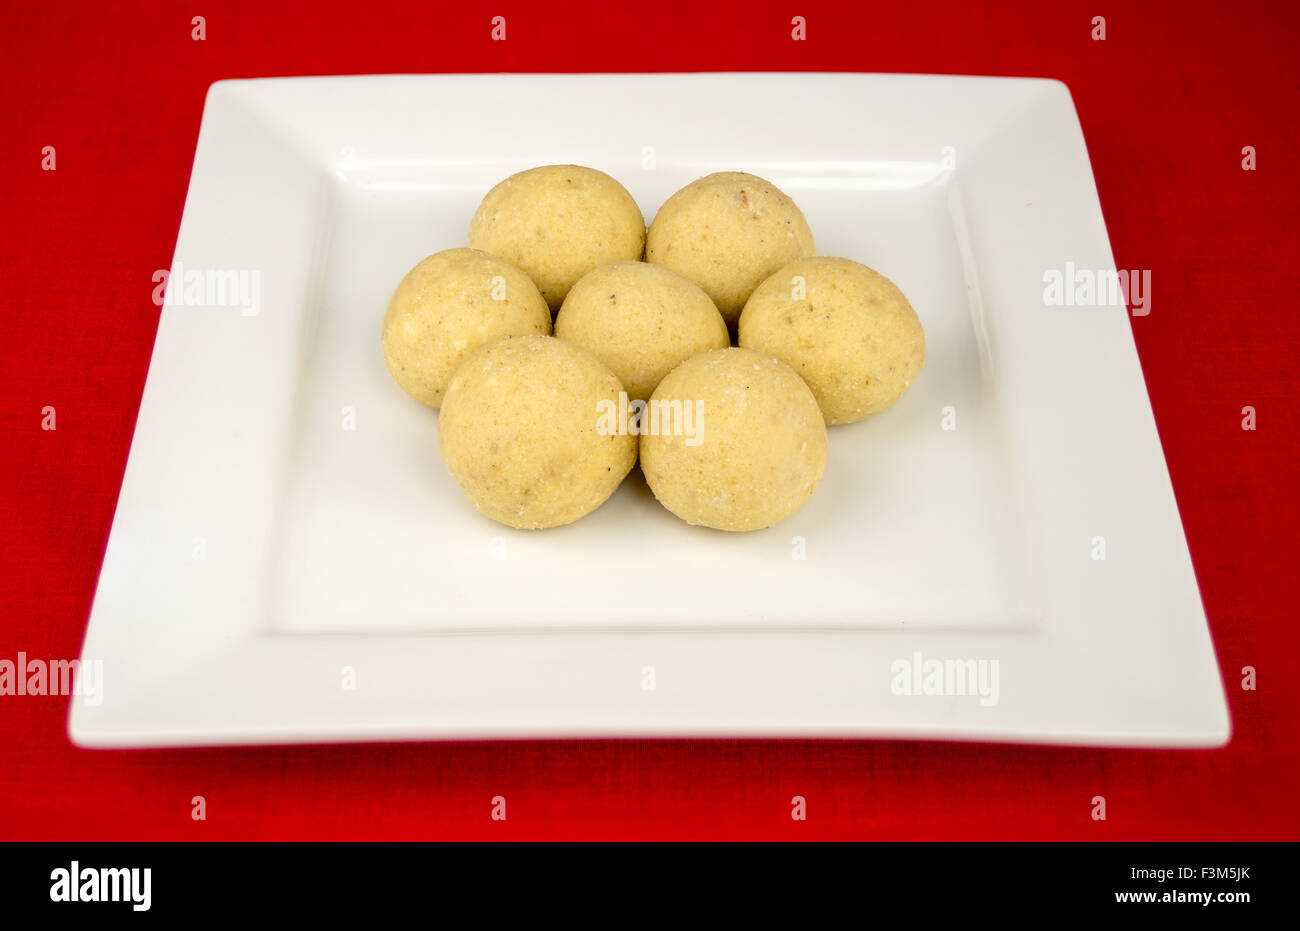 Ball shaped Indian laddu (laddoo) dessert plated on a square ceramic platter against a red tablecloth. Stock Photo